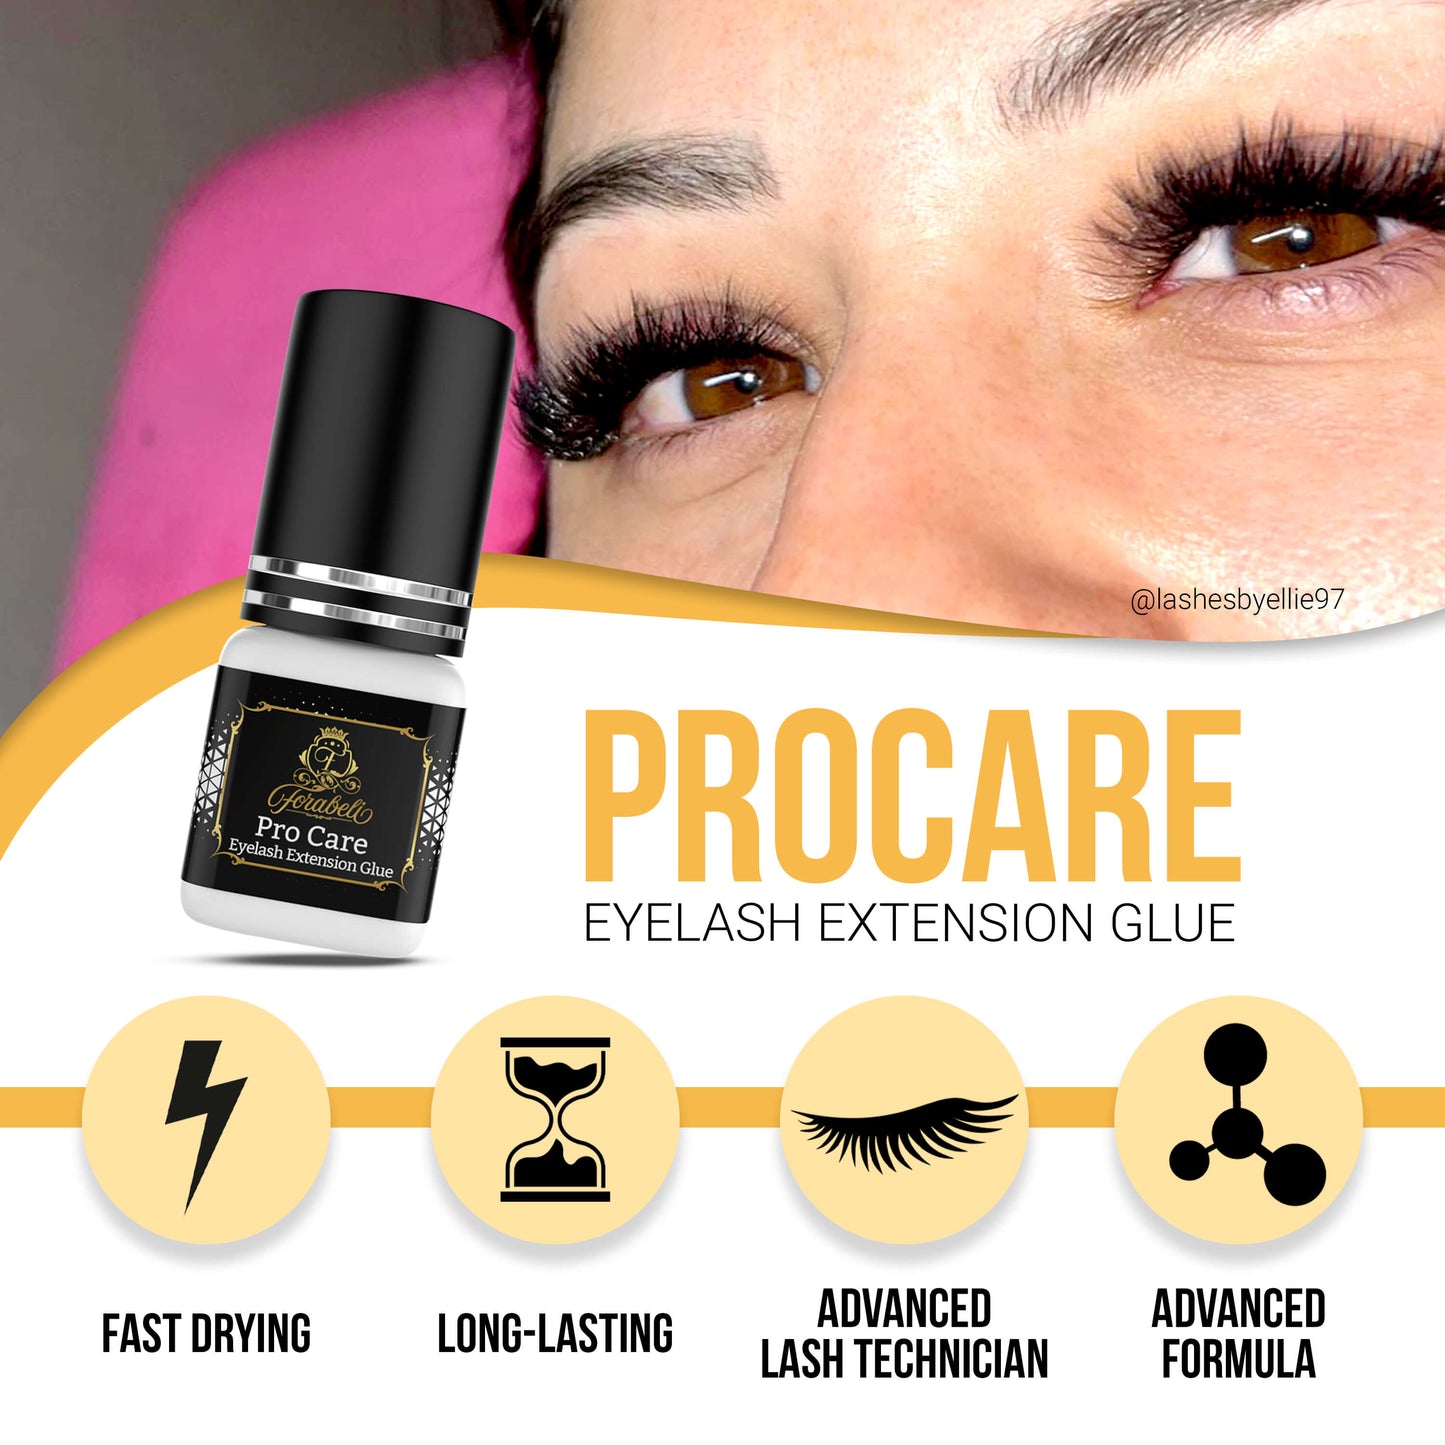 Procare eyelash extension glue with fast-drying feature, long-lasting hold, designed for advanced lash technicians, and formulated with an advanced adhesive formula.